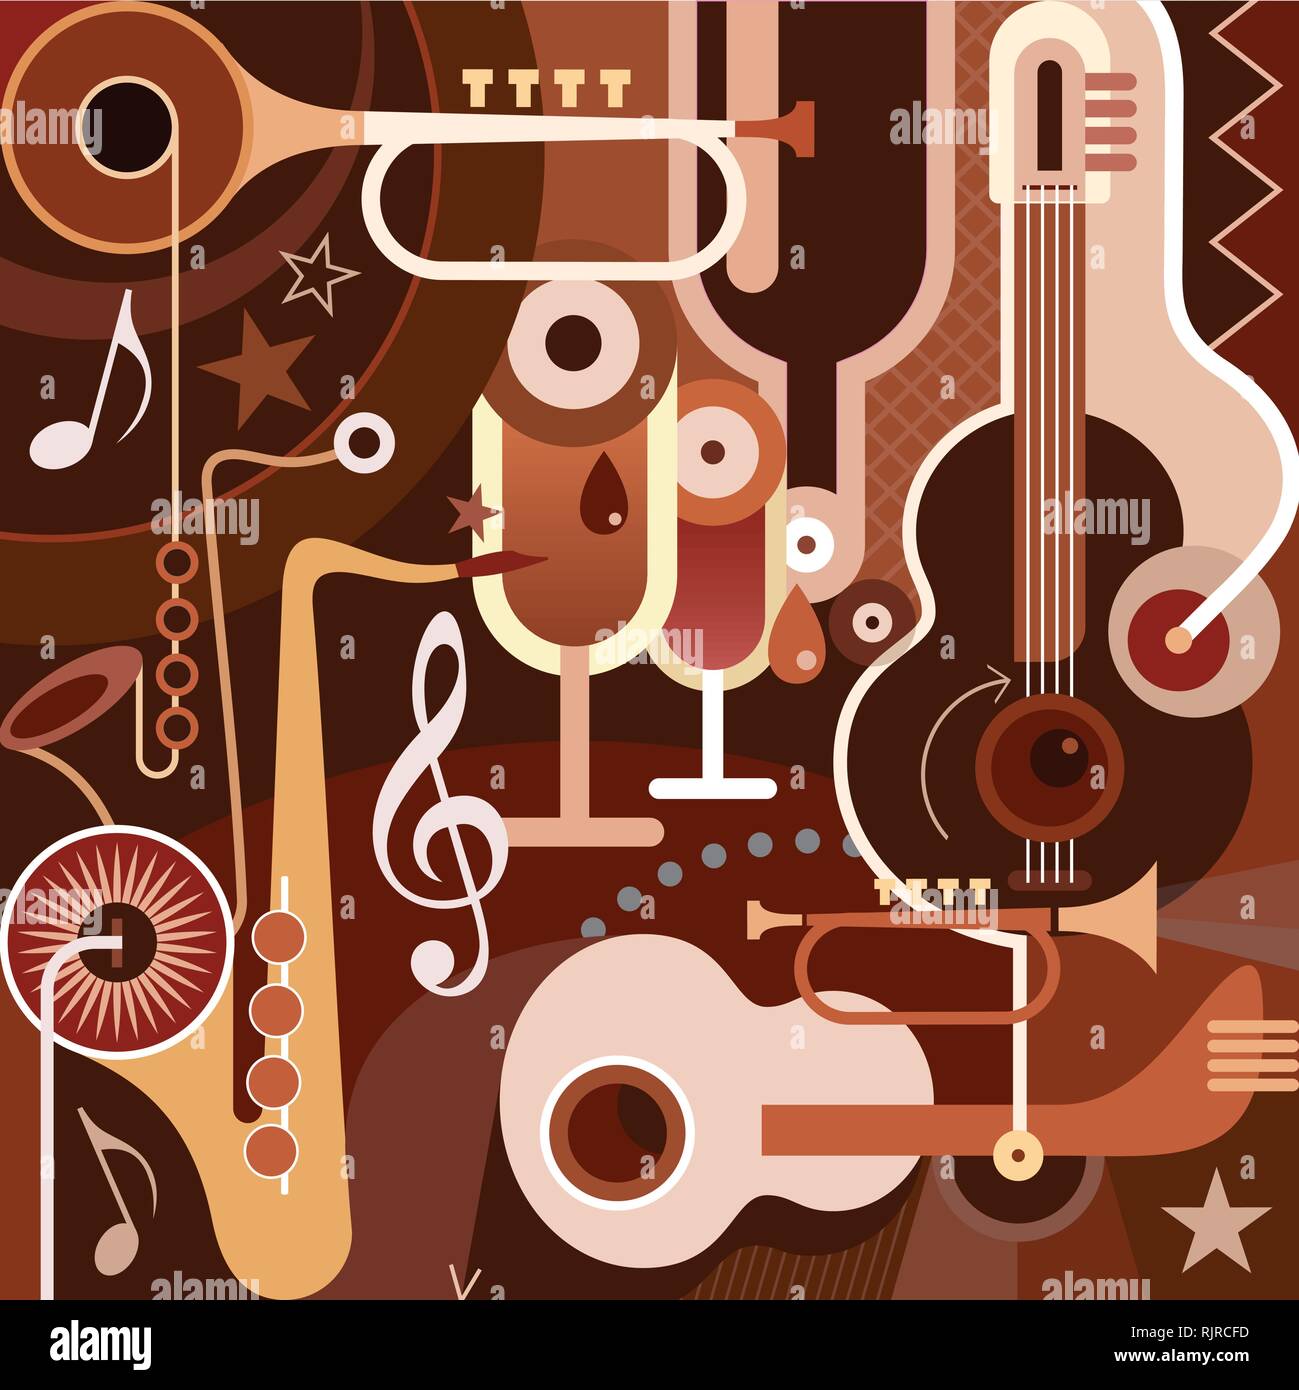 Music. Abstract vector illustration with musical instruments. Stock Vector